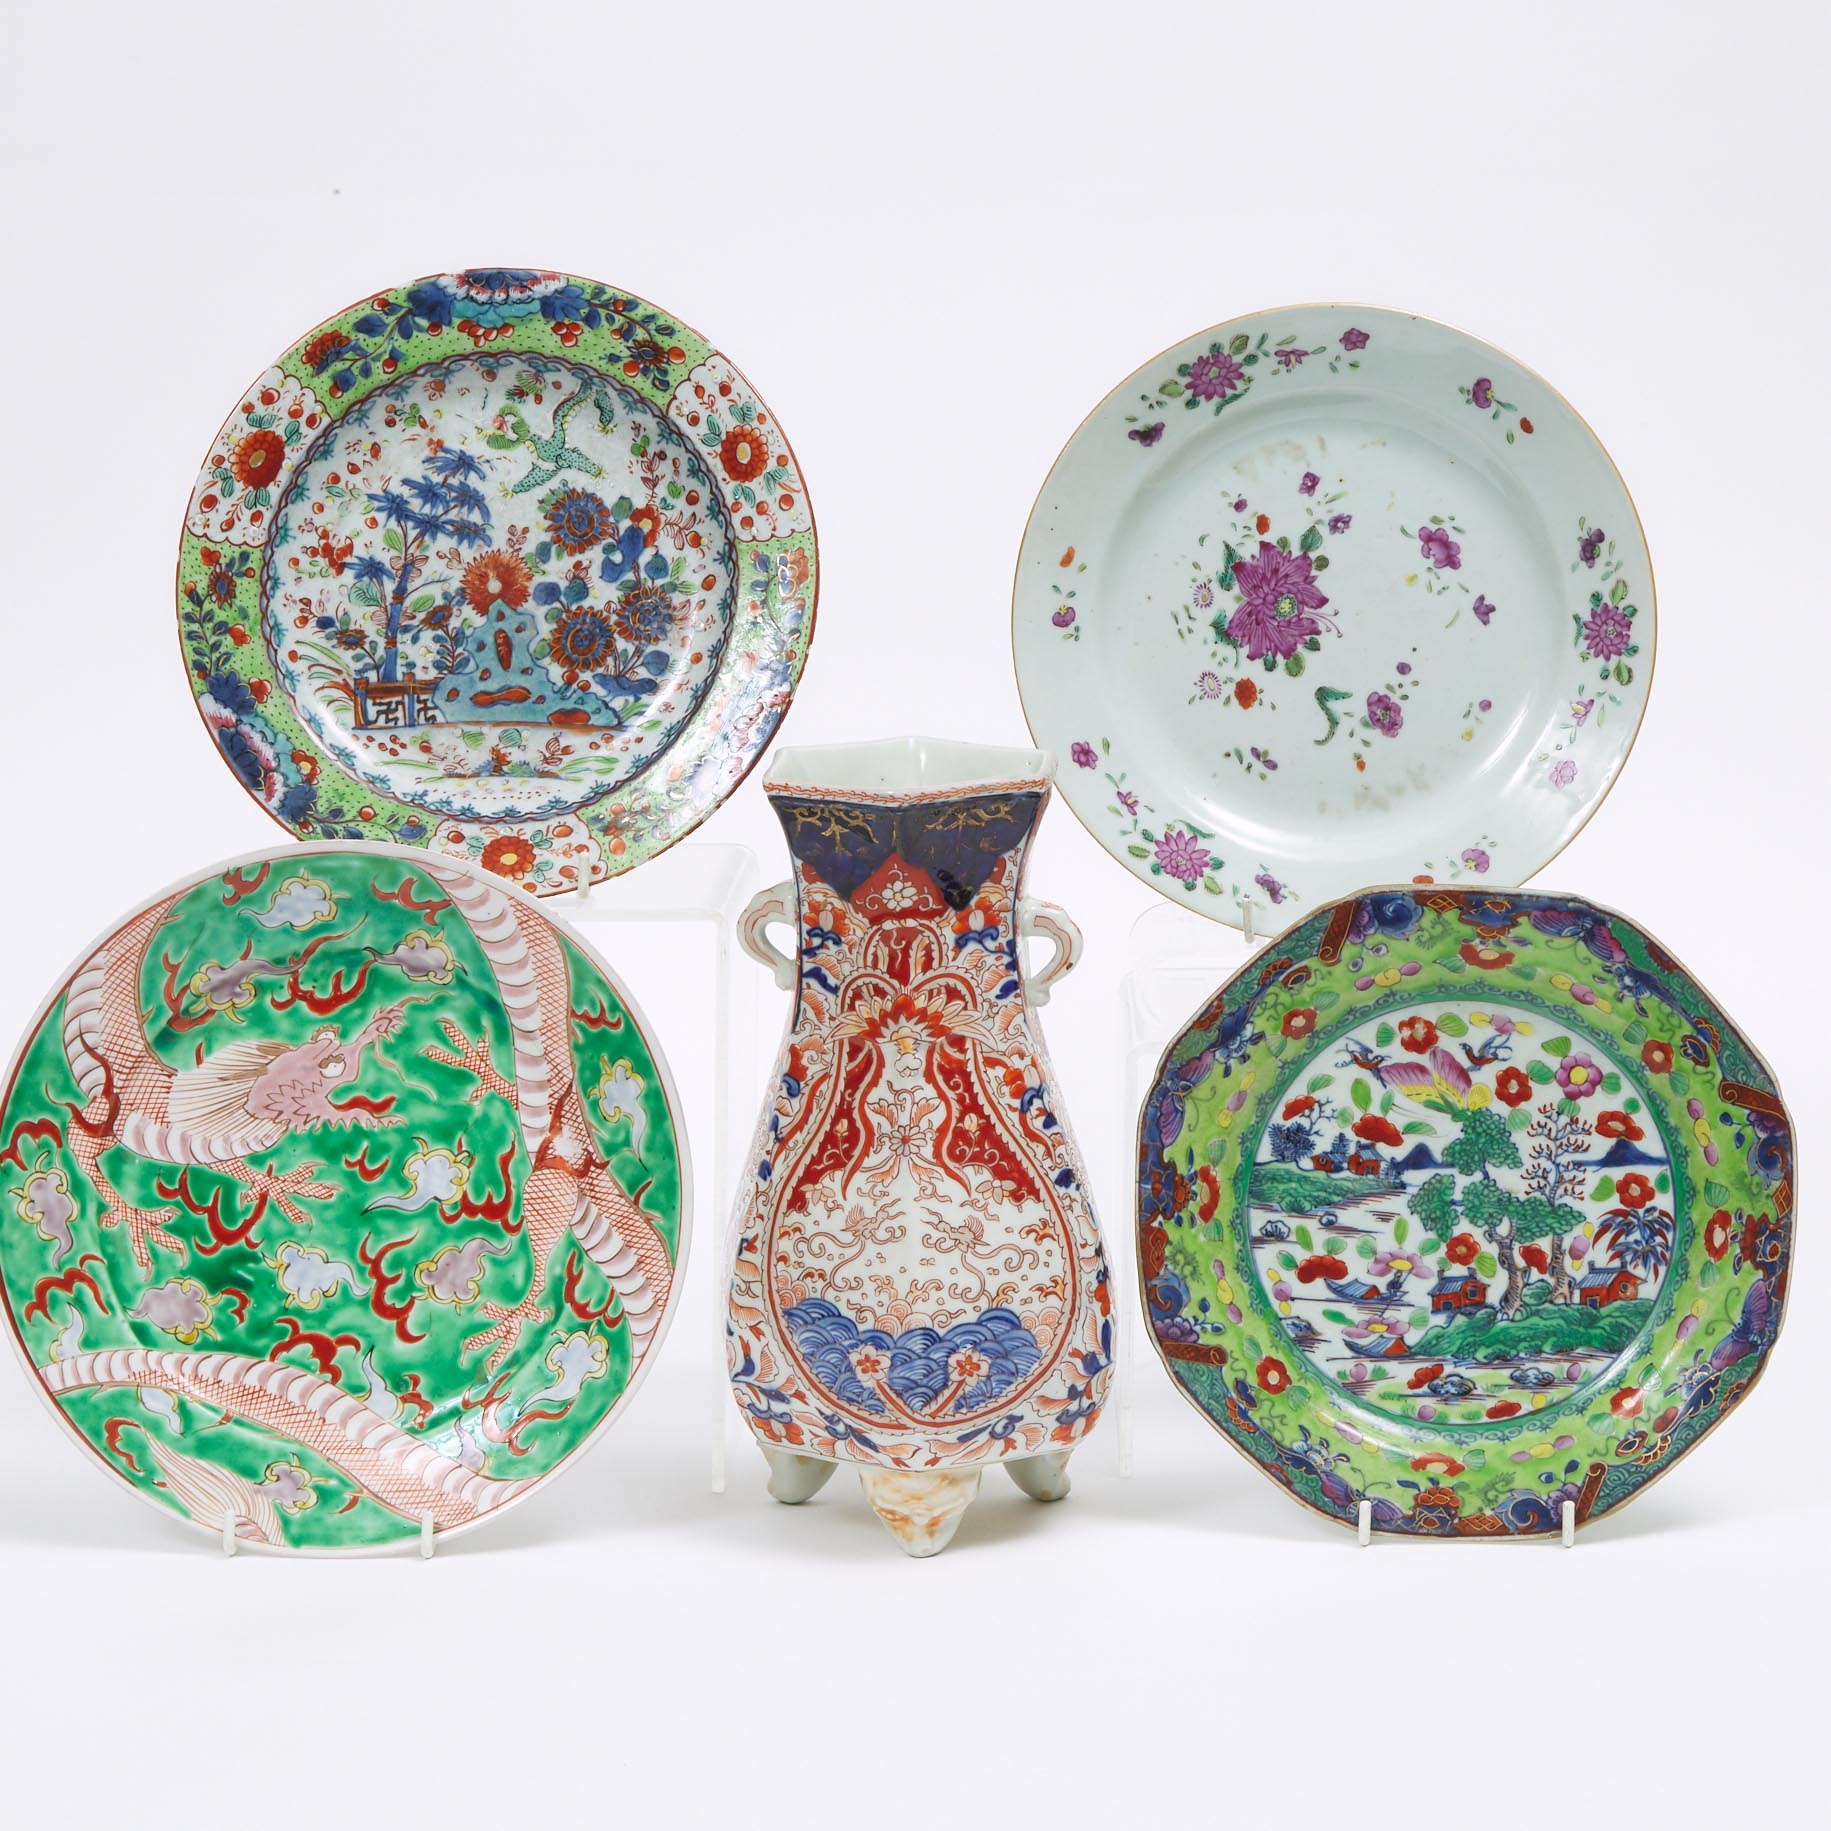 A Group of Four Porcelain Plates, together with a Chinese Imari Vase